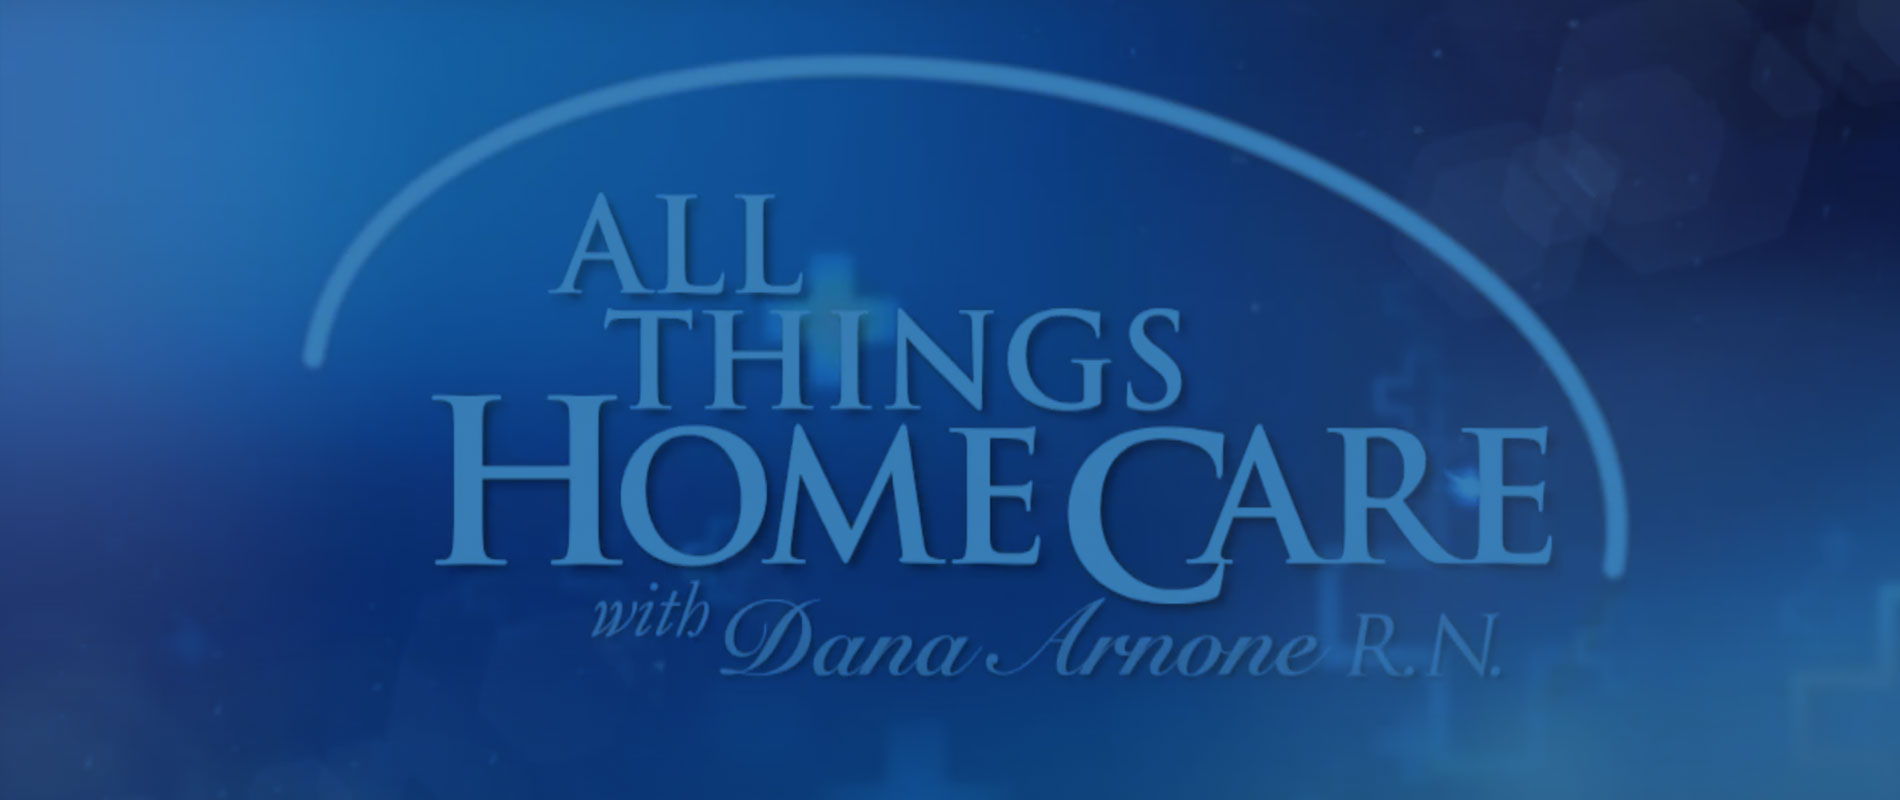 Farmingdale PT West Featured in All Things Homecare